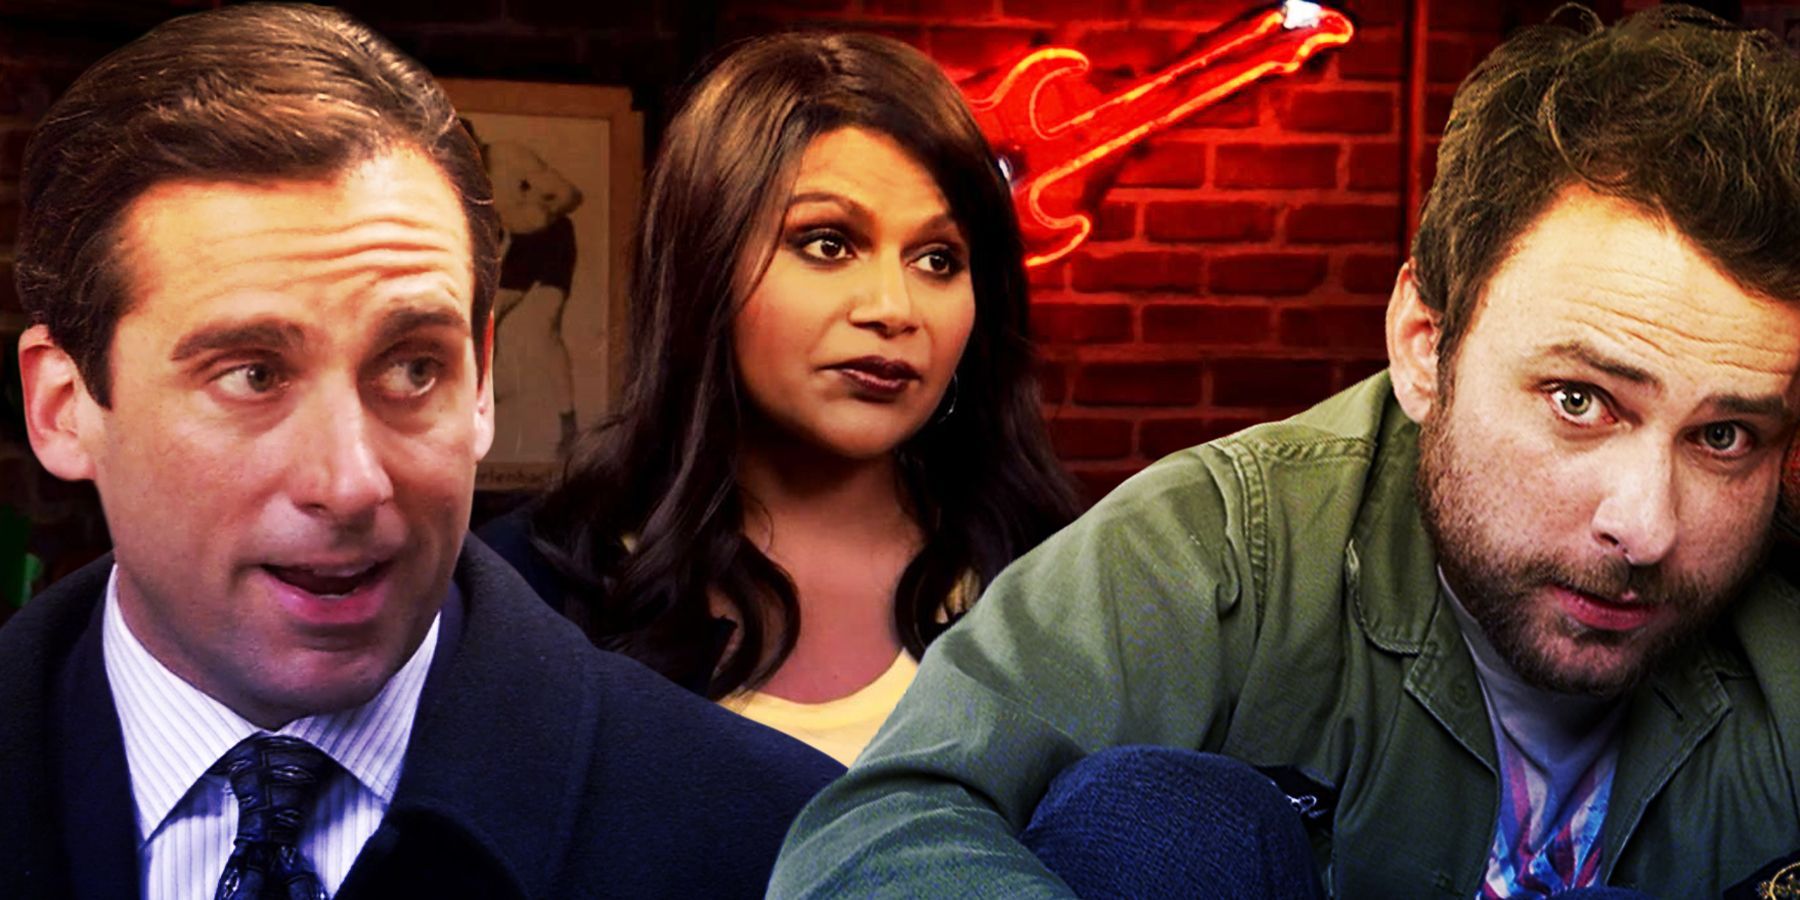 Michael Scott from show The Office, Mindy Kaling's character Cindy and Charlie Kelly as seen in show It's Always Sunny in Philadelphia